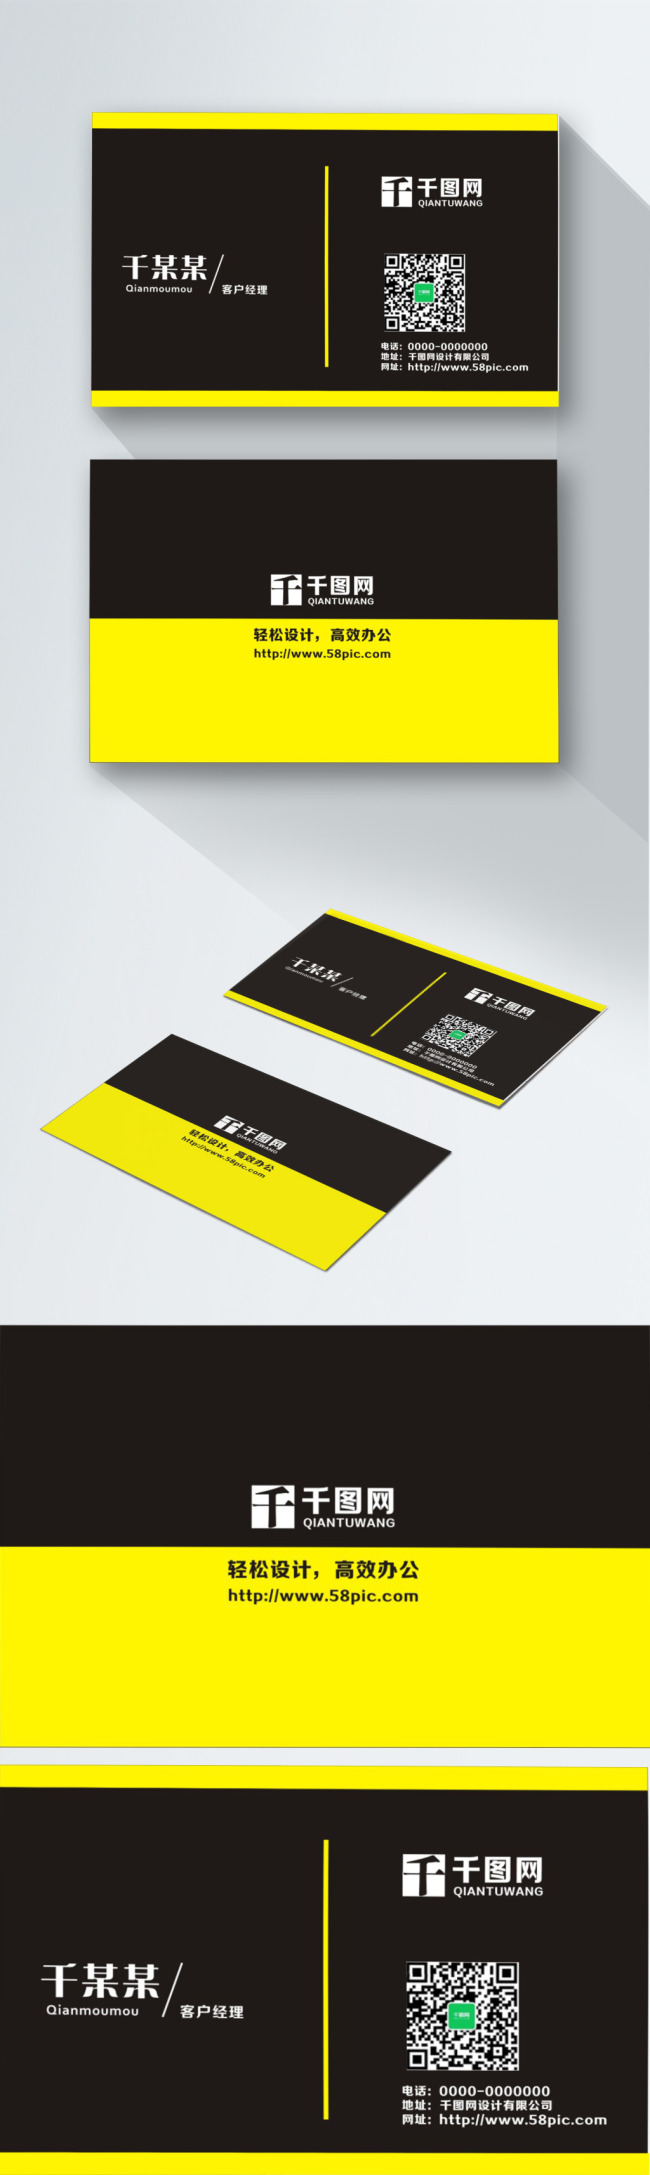 Download Black And Yellow Business Card Template Image Picture Free Download 450003125 Lovepik Com PSD Mockup Templates